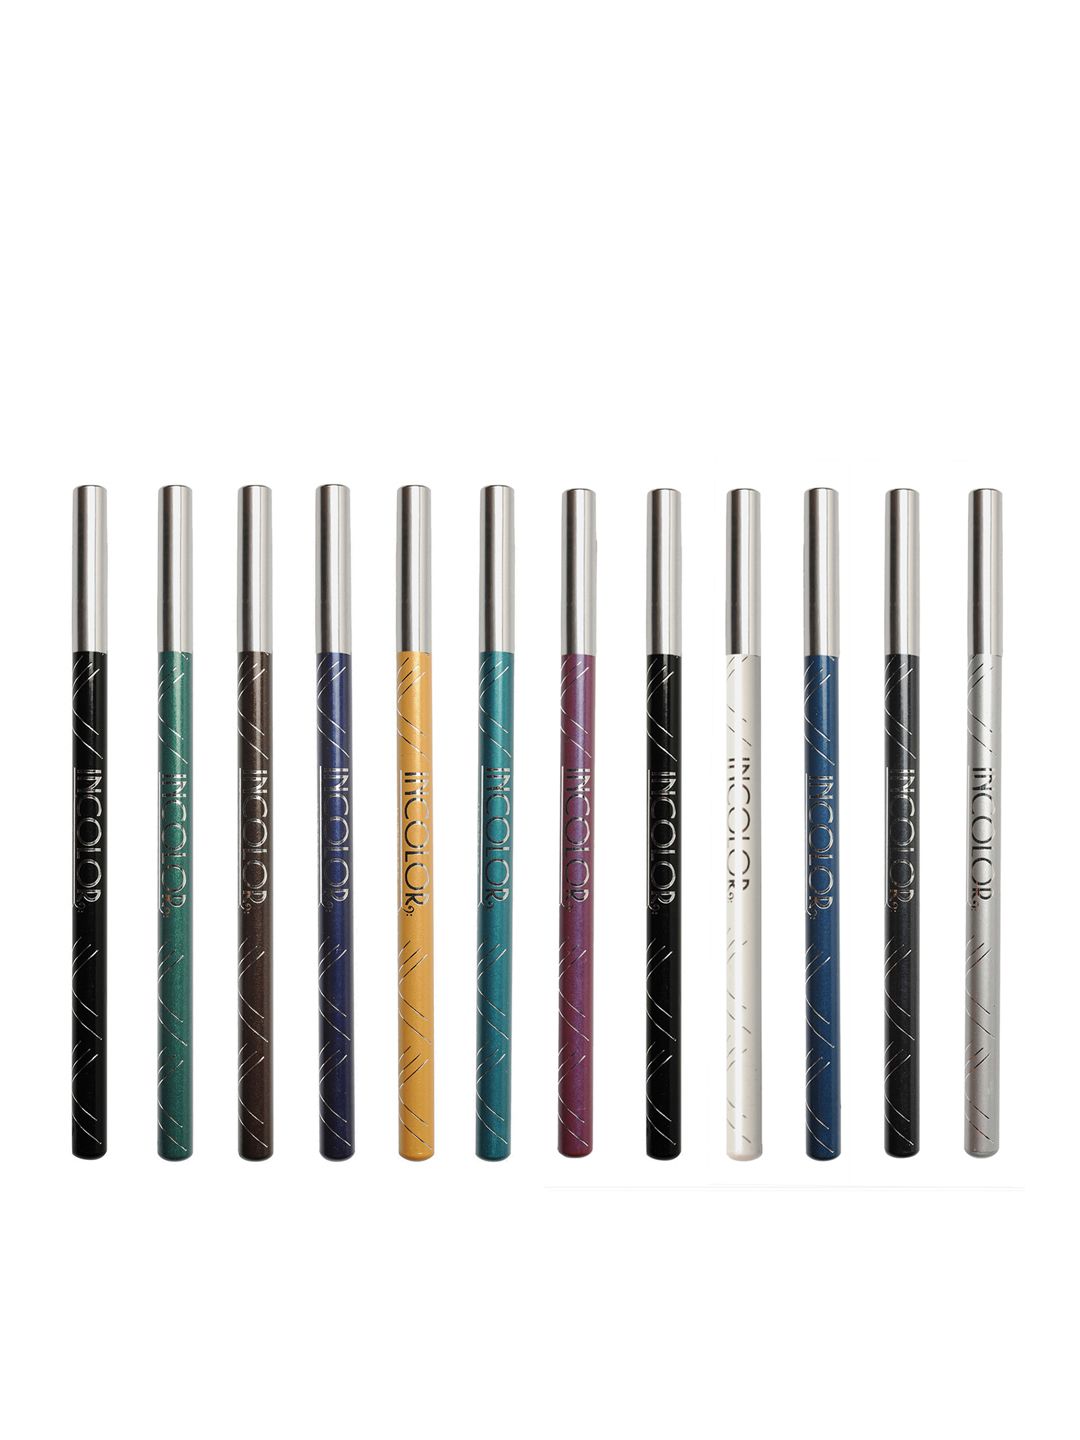 INCOLOR Set of 12 Intense Longwear Eye Pencils Price in India